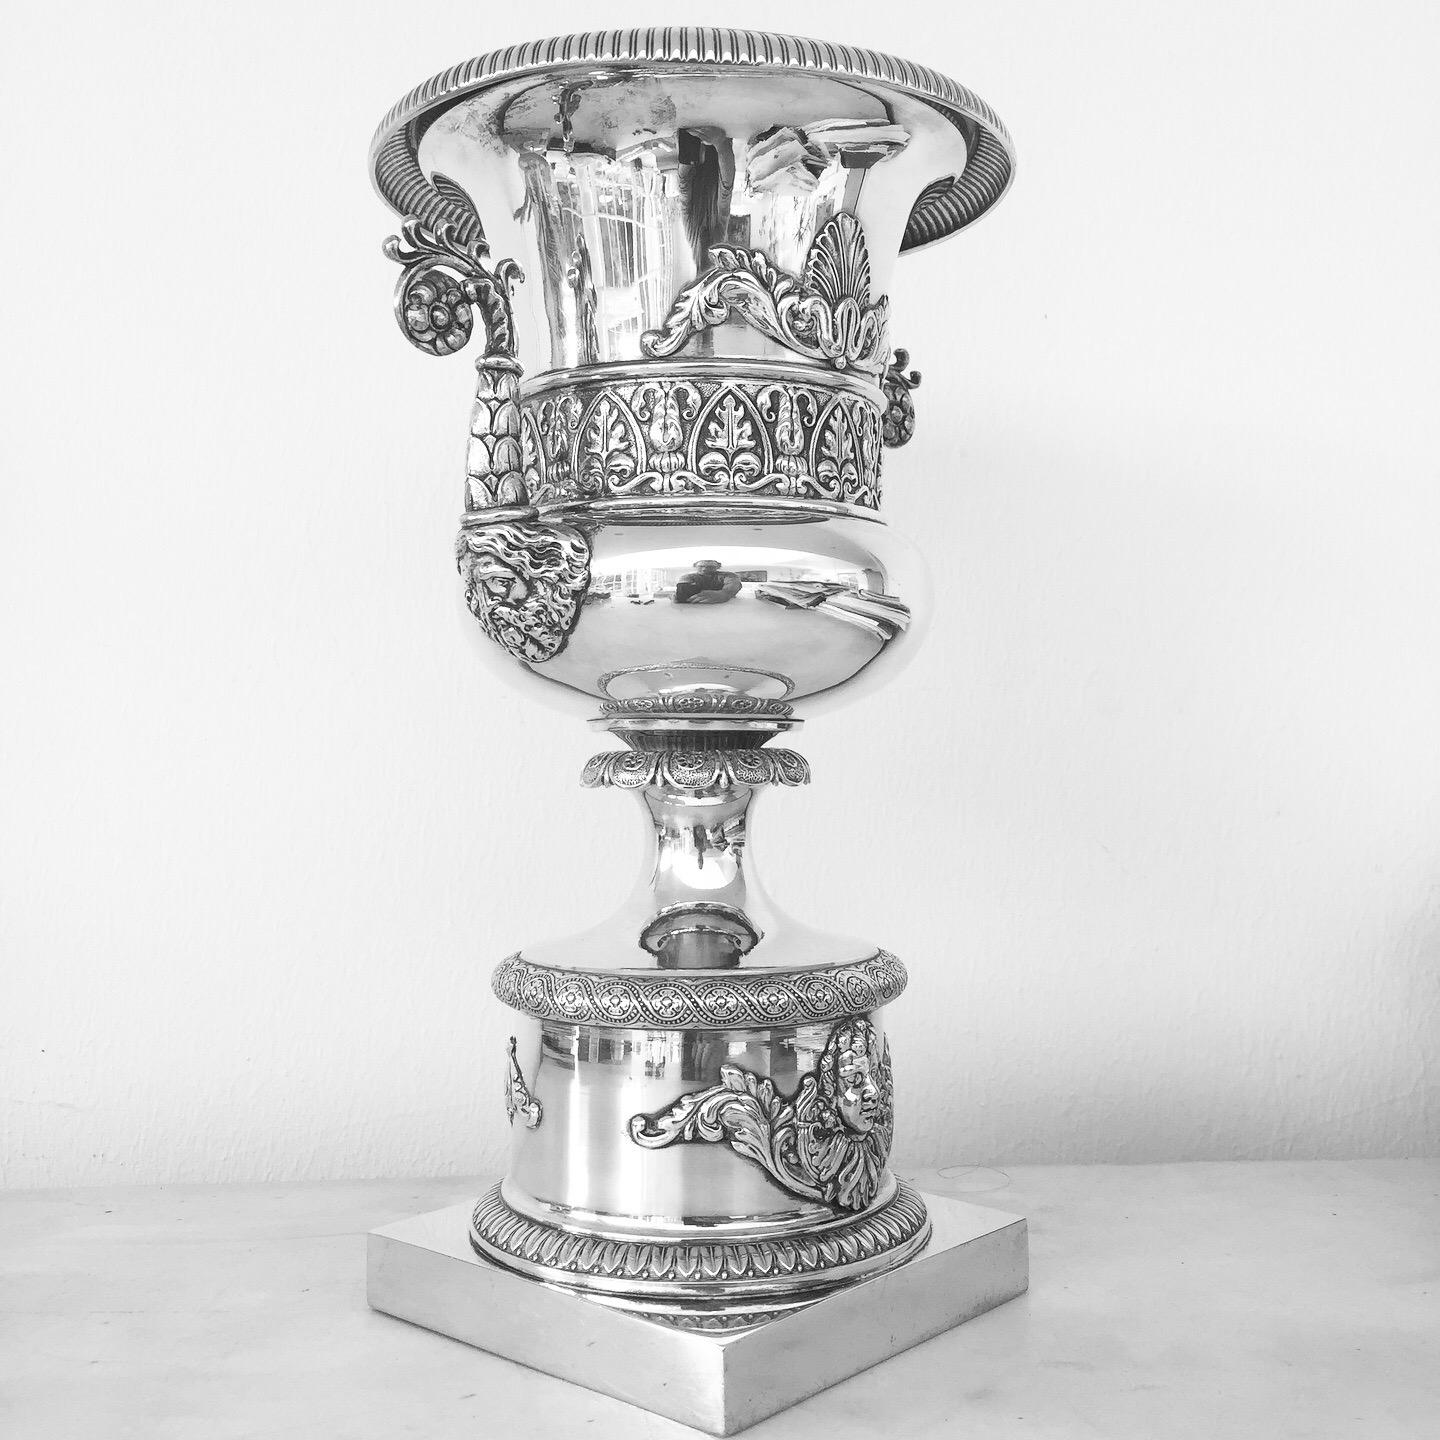 Early 19th Century Italian Neoclassical Silver Urn Vase Milan by Emanuele Caber For Sale 1